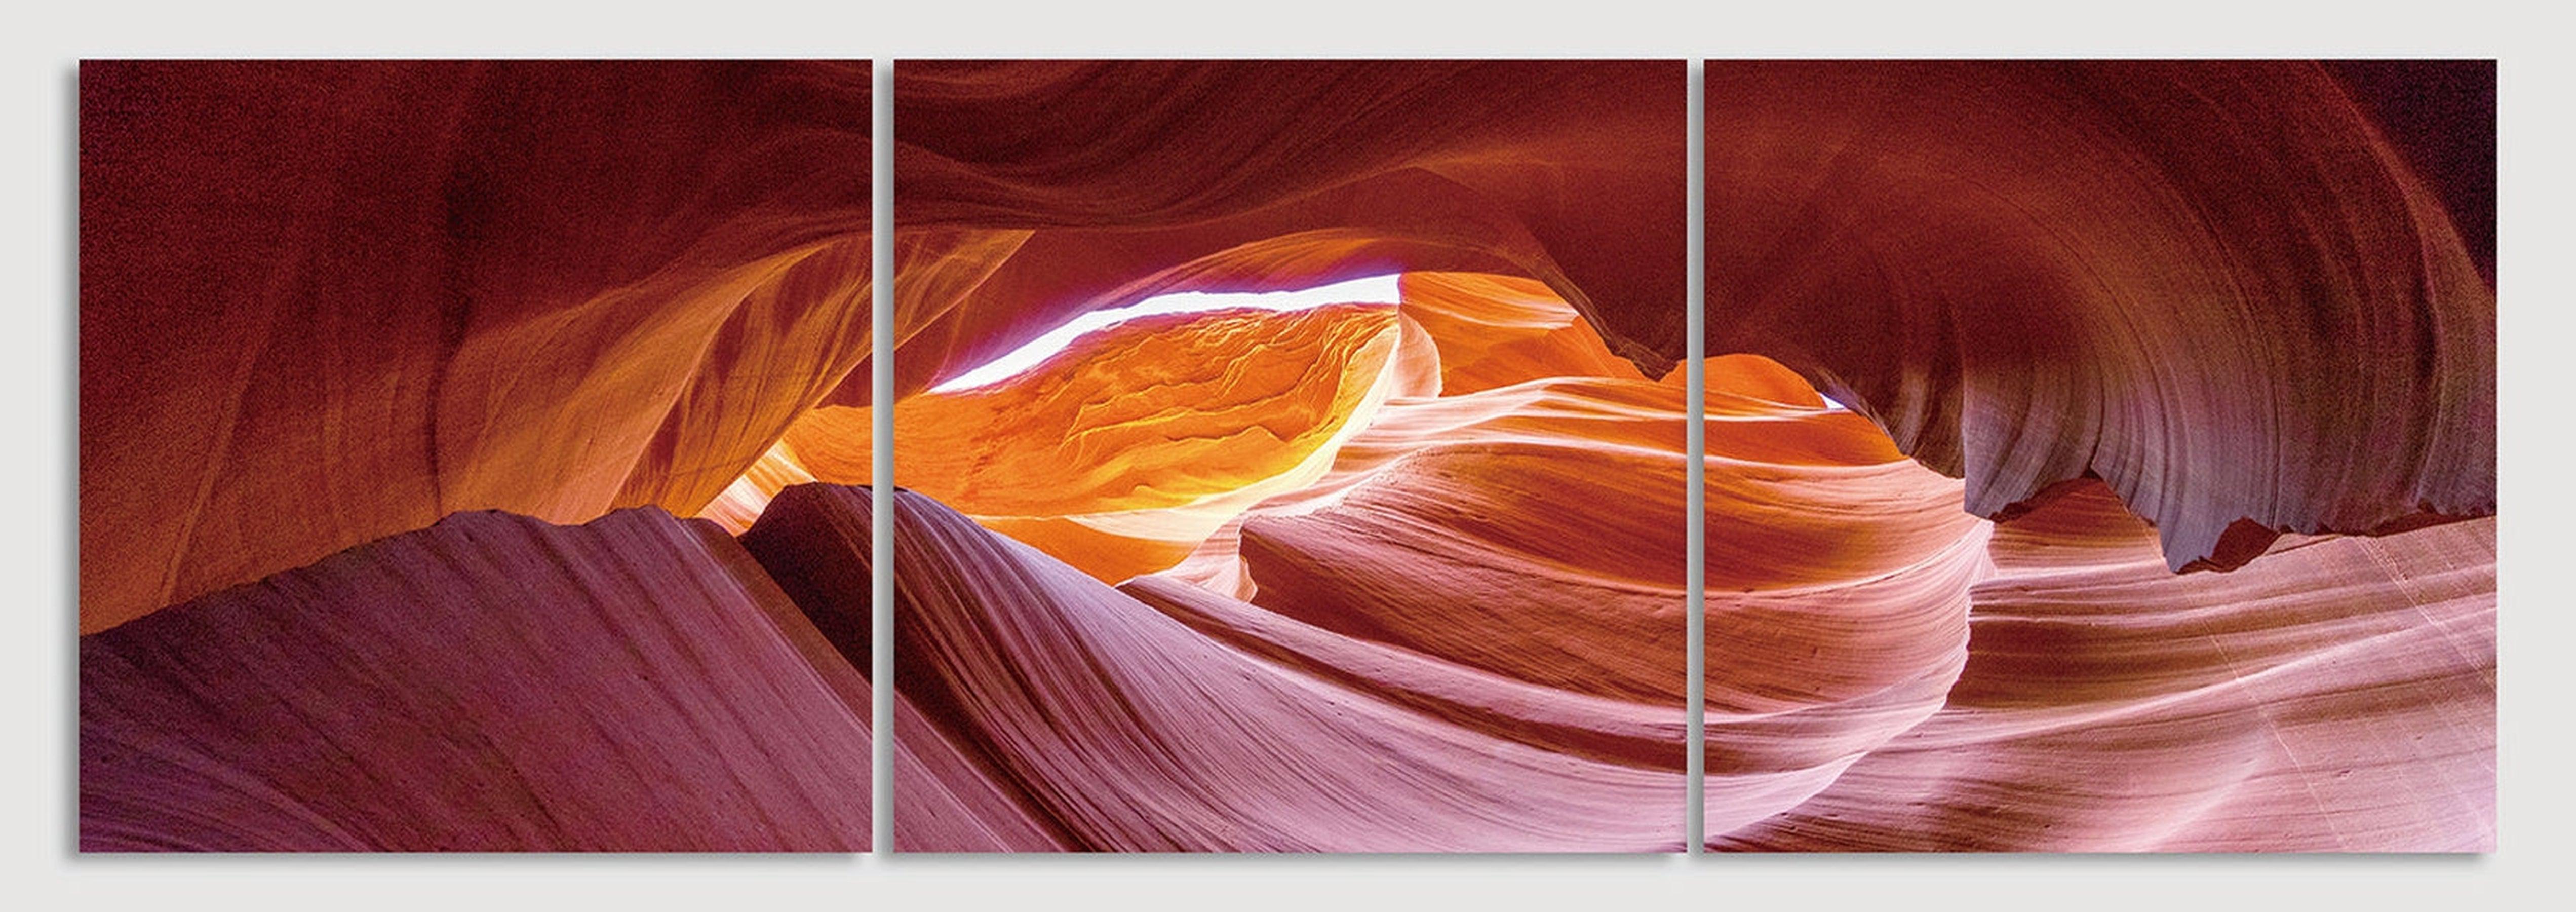 Red Canyon Landscape Wall Art | 60x60 cm